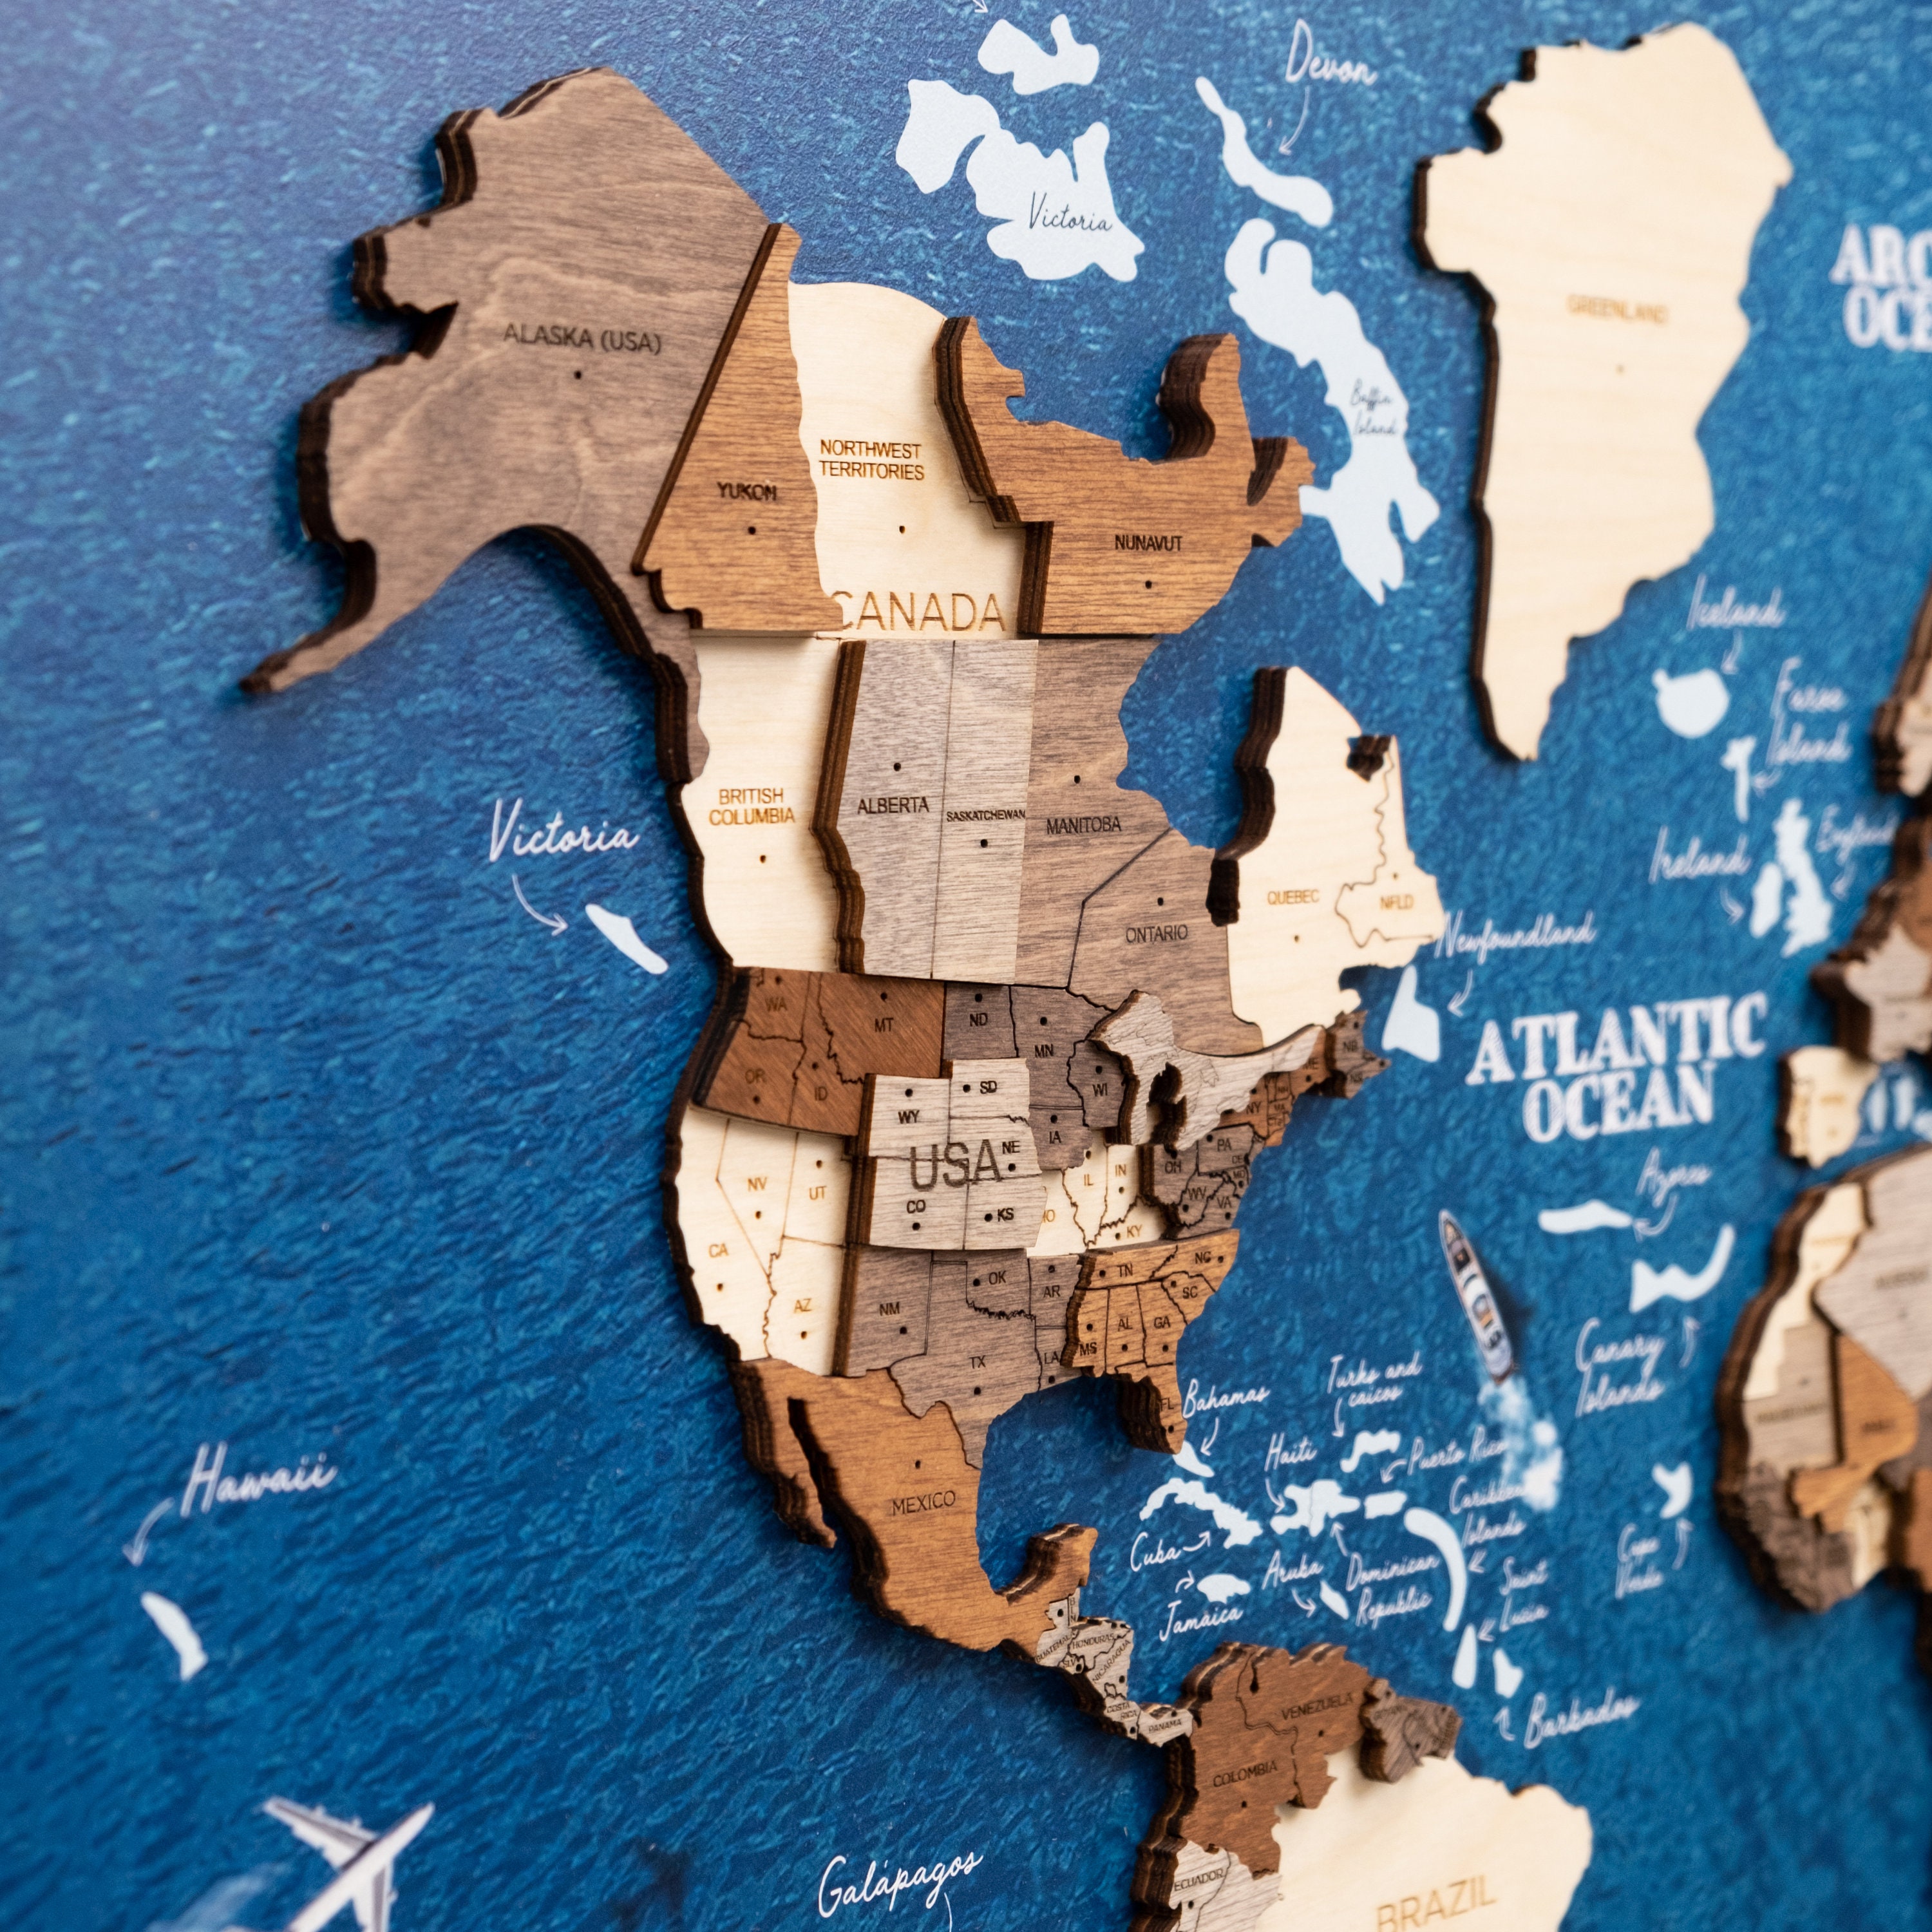 3D Wooden World Map Multicolor – Awesometik